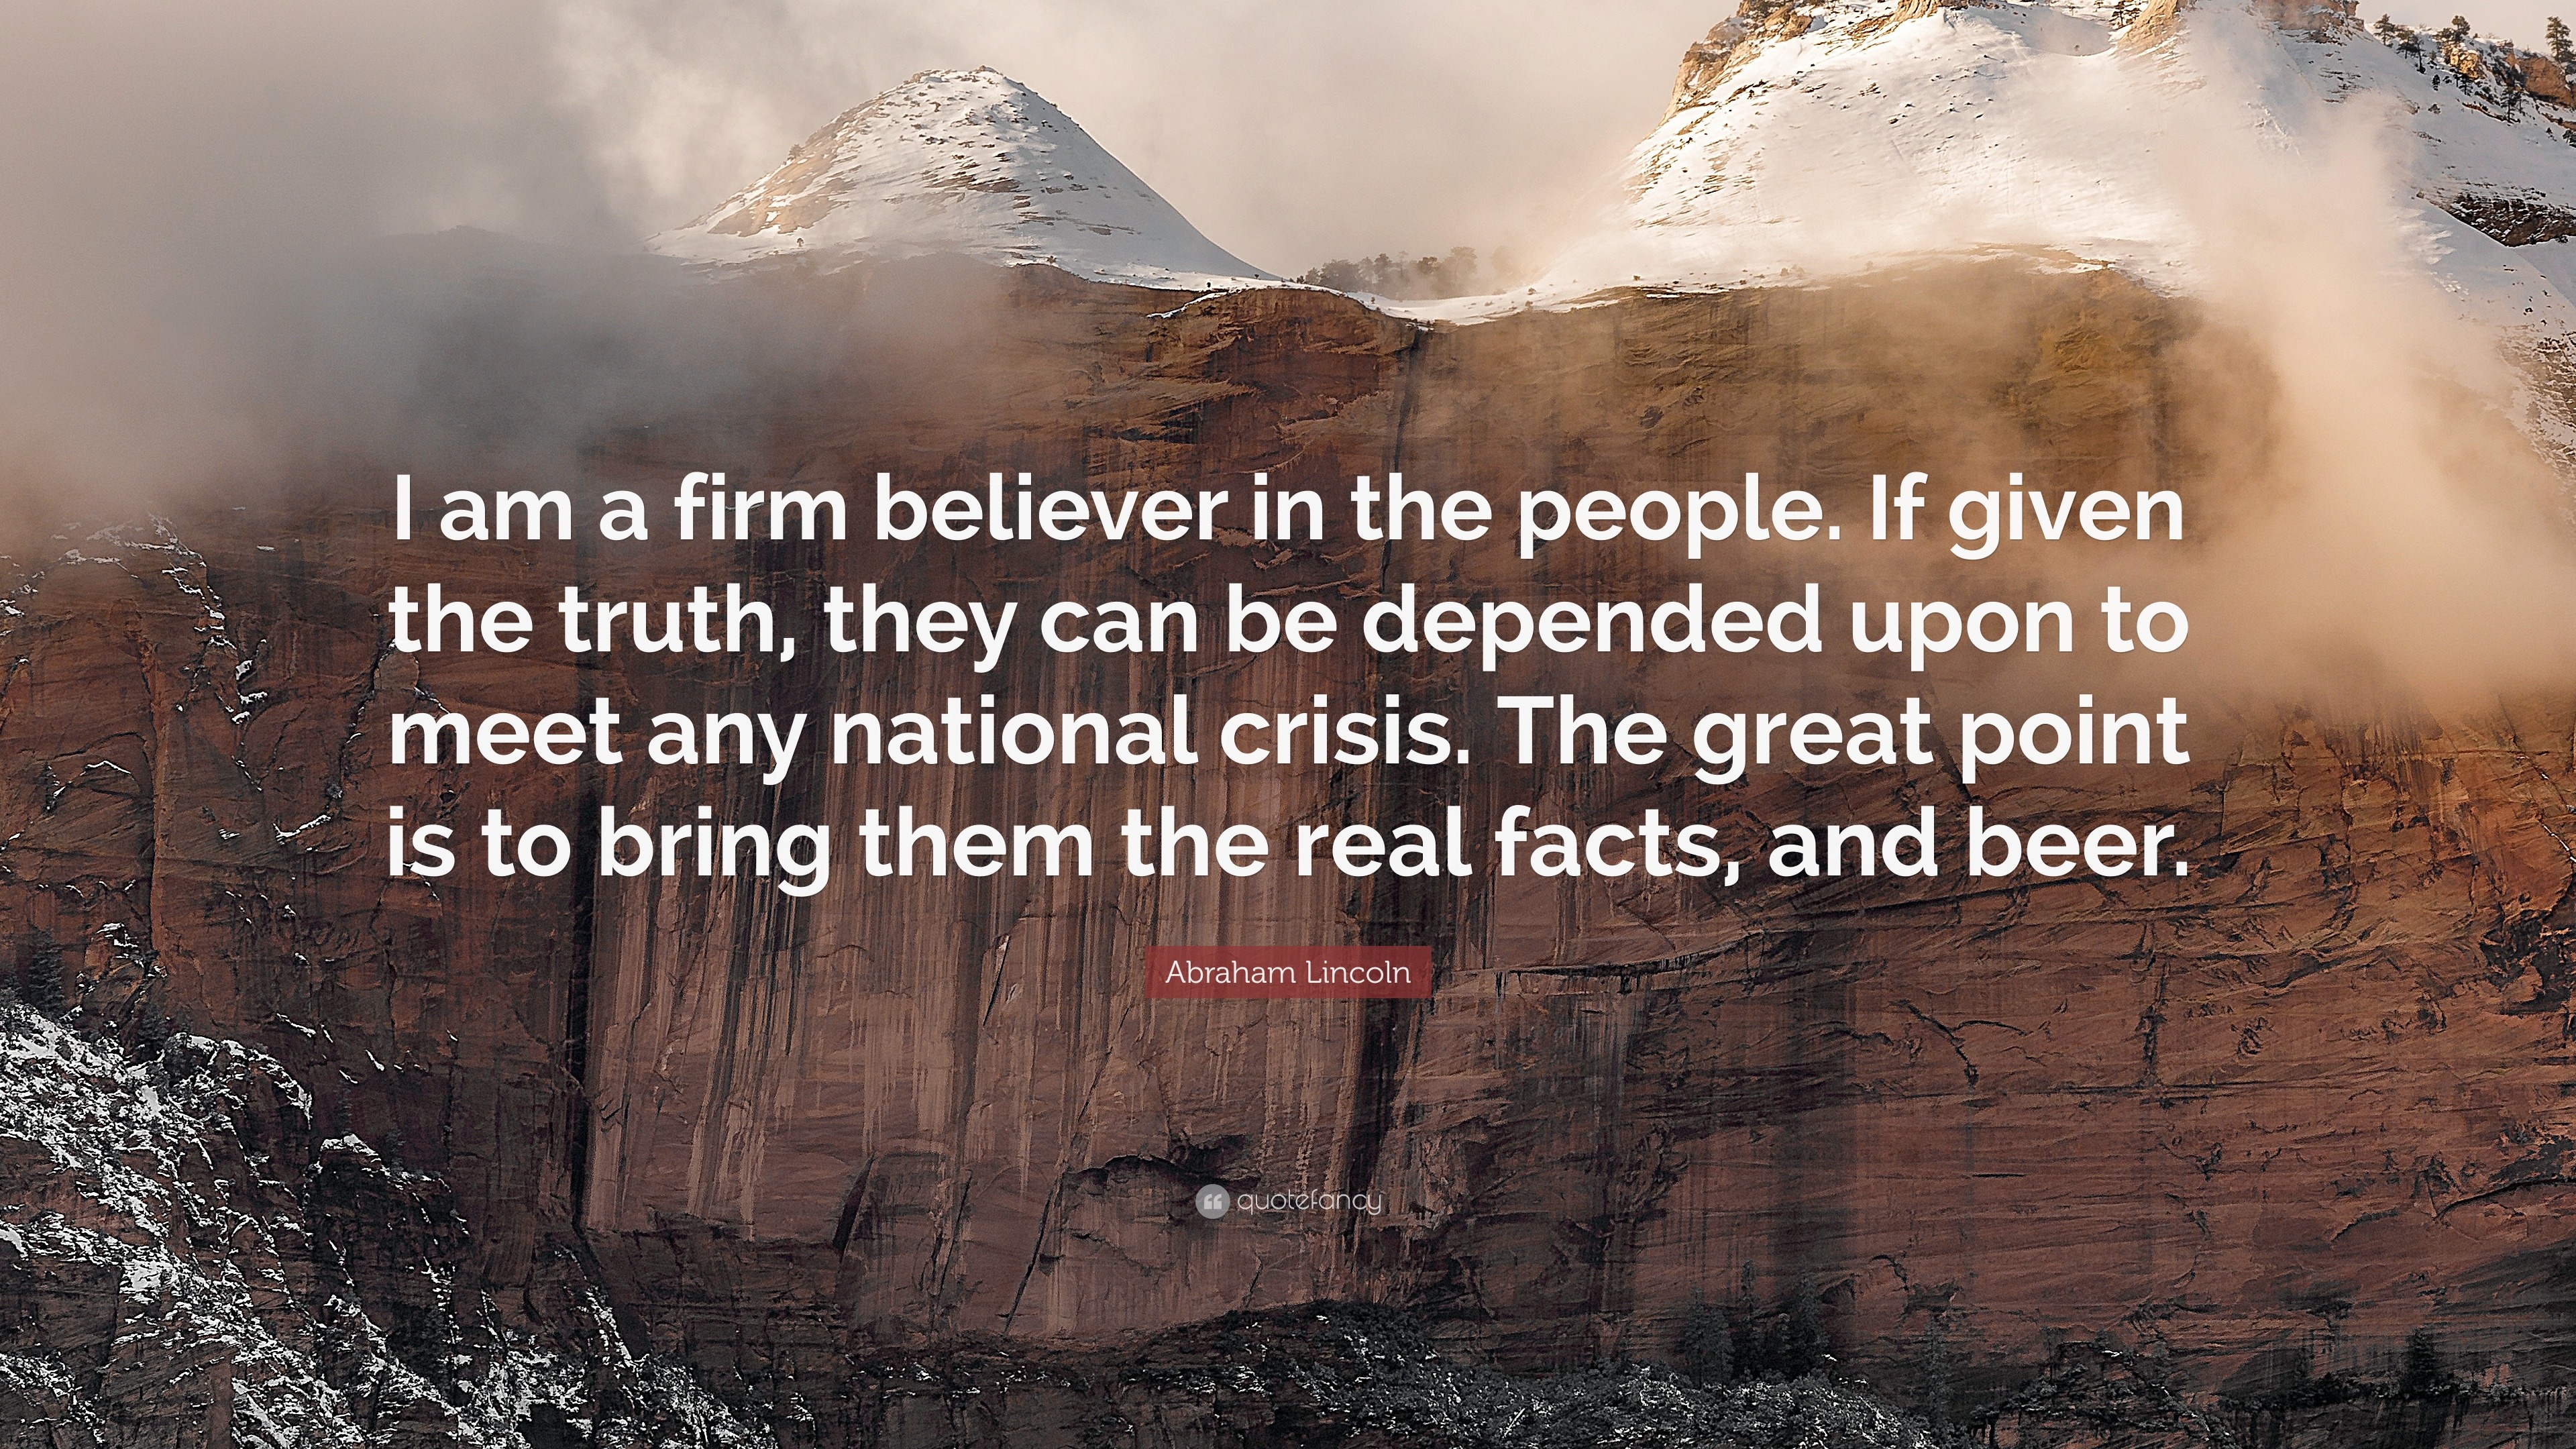 Abraham Lincoln Quote: “I am a firm believer in the people. If given the  truth, they can be depended upon to meet any national crisis. The great”